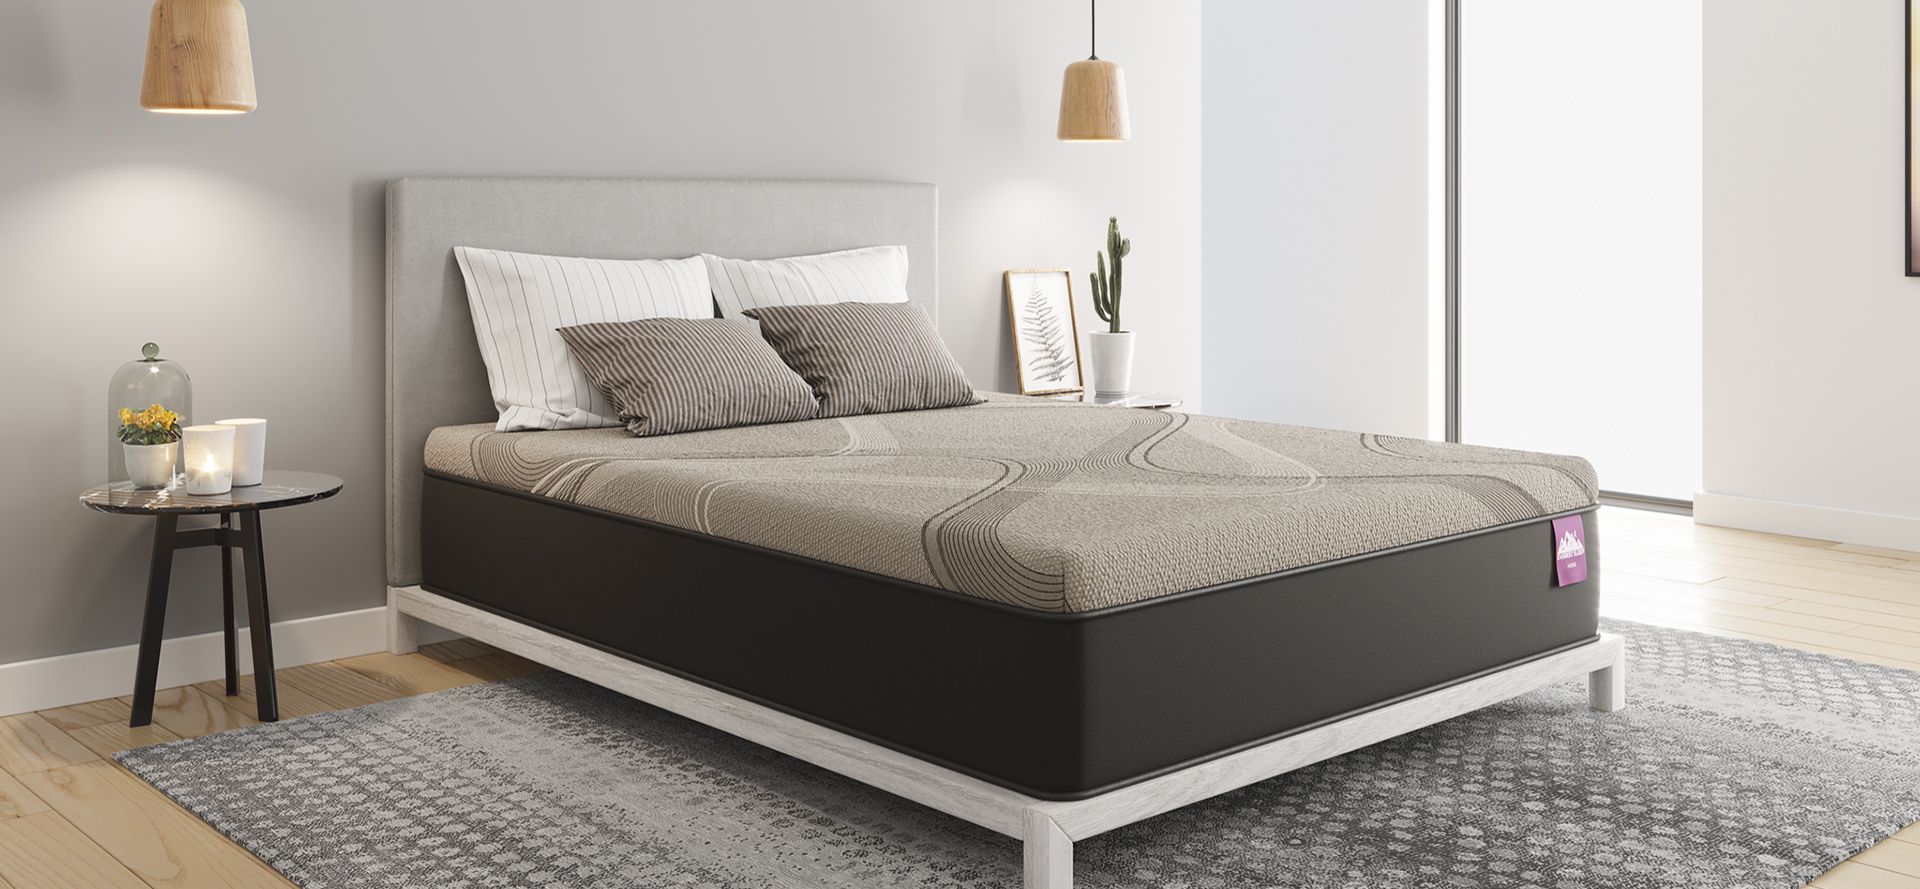 A Bed With Hybrid Mattress.